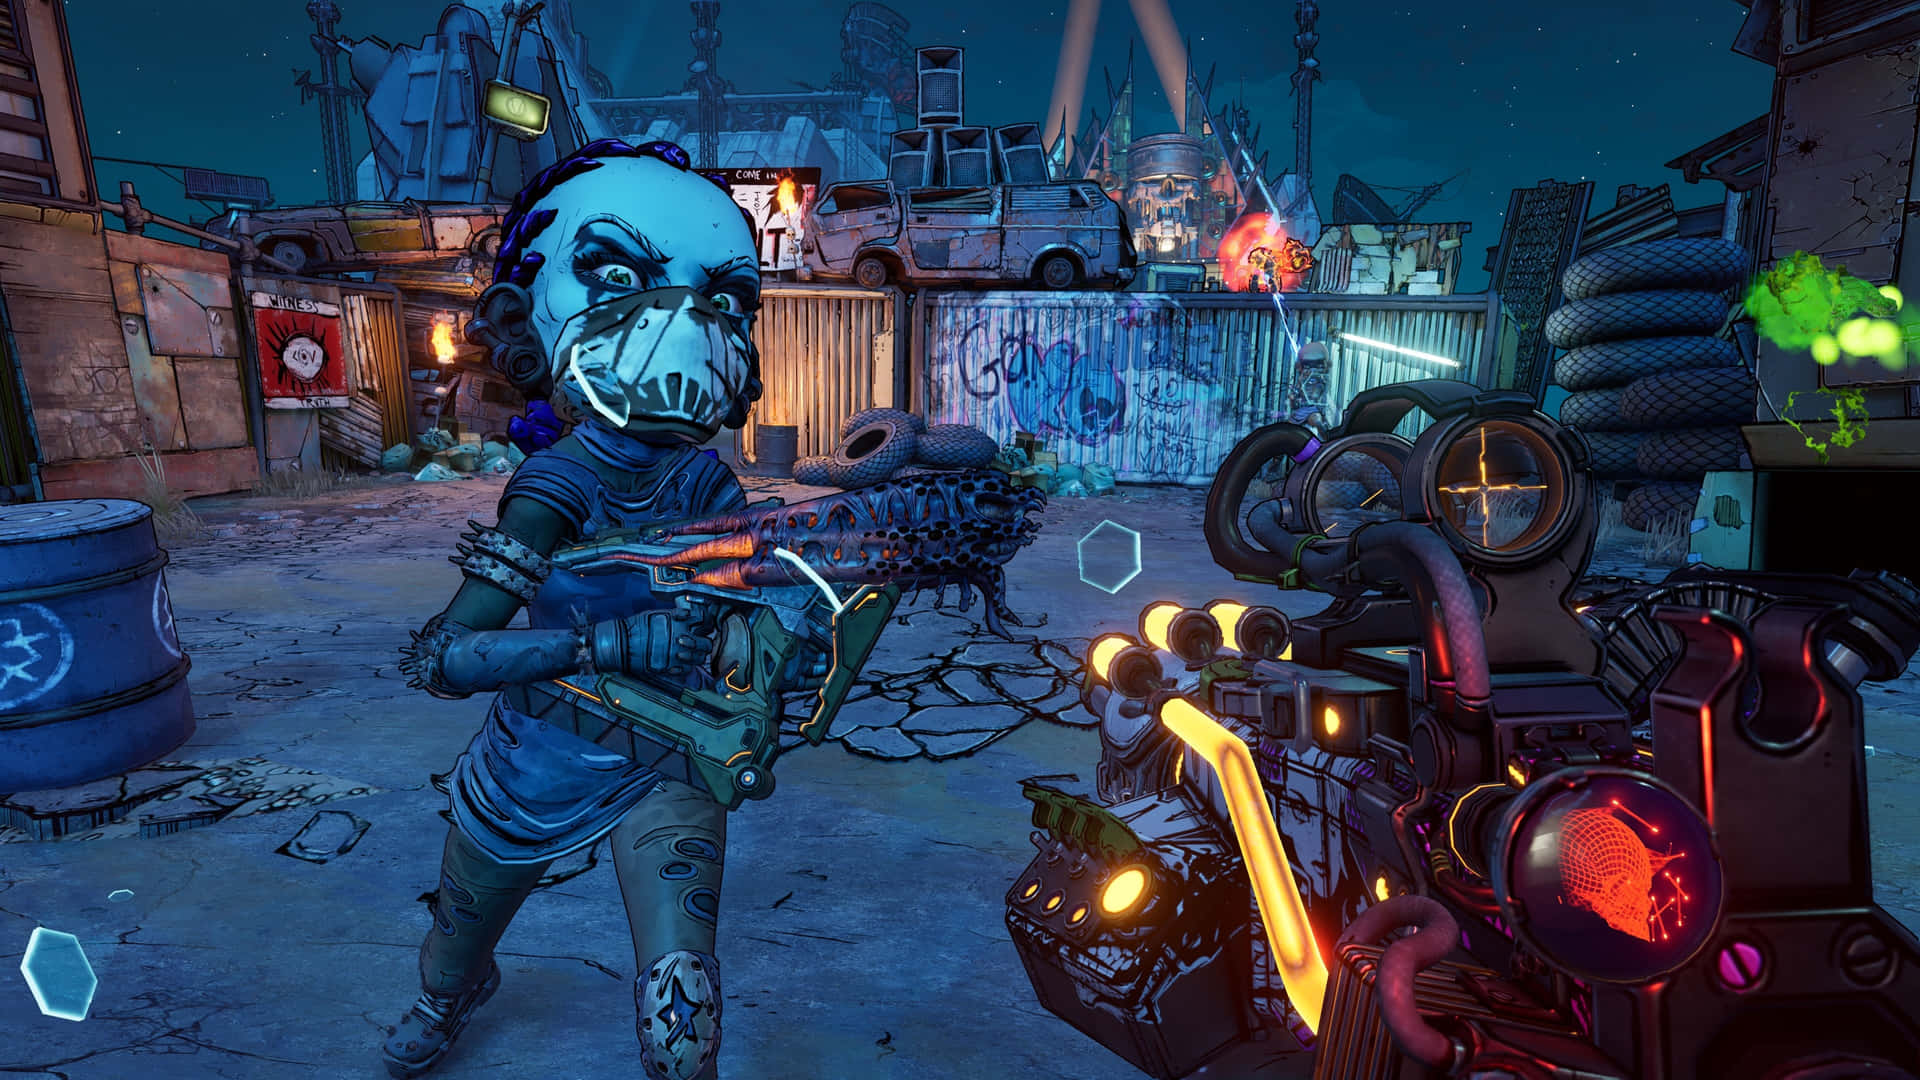 Fight through the wasteland of Pandora in the intense shooter game Borderlands 3